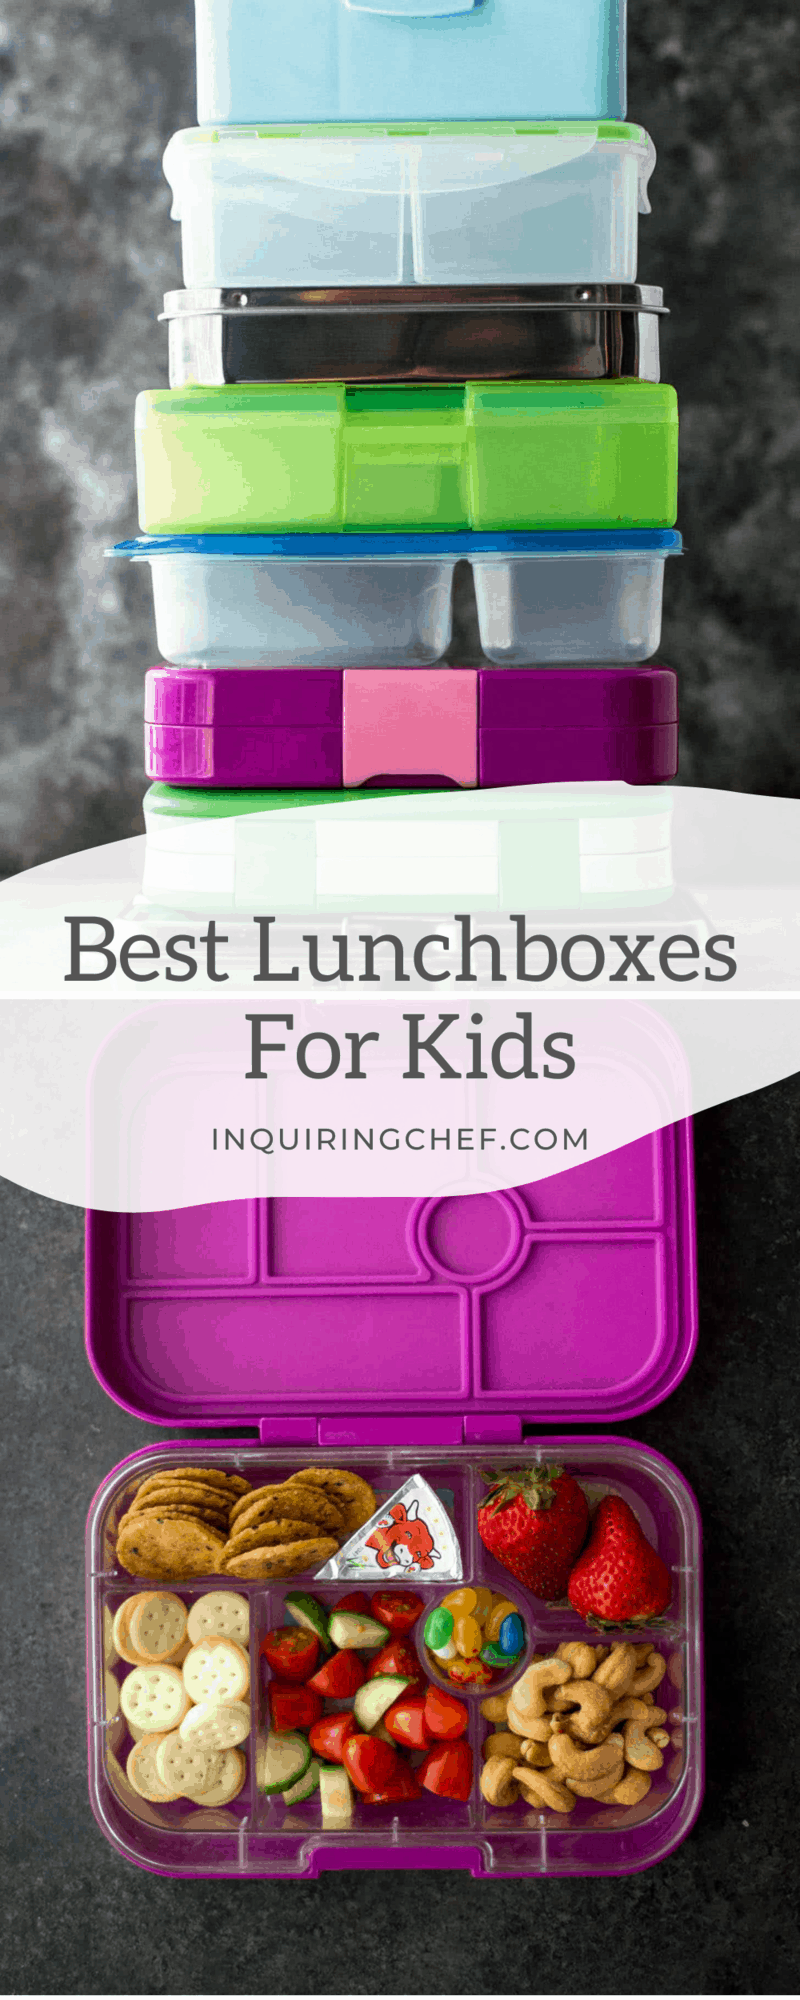 best lunchboxes for kids